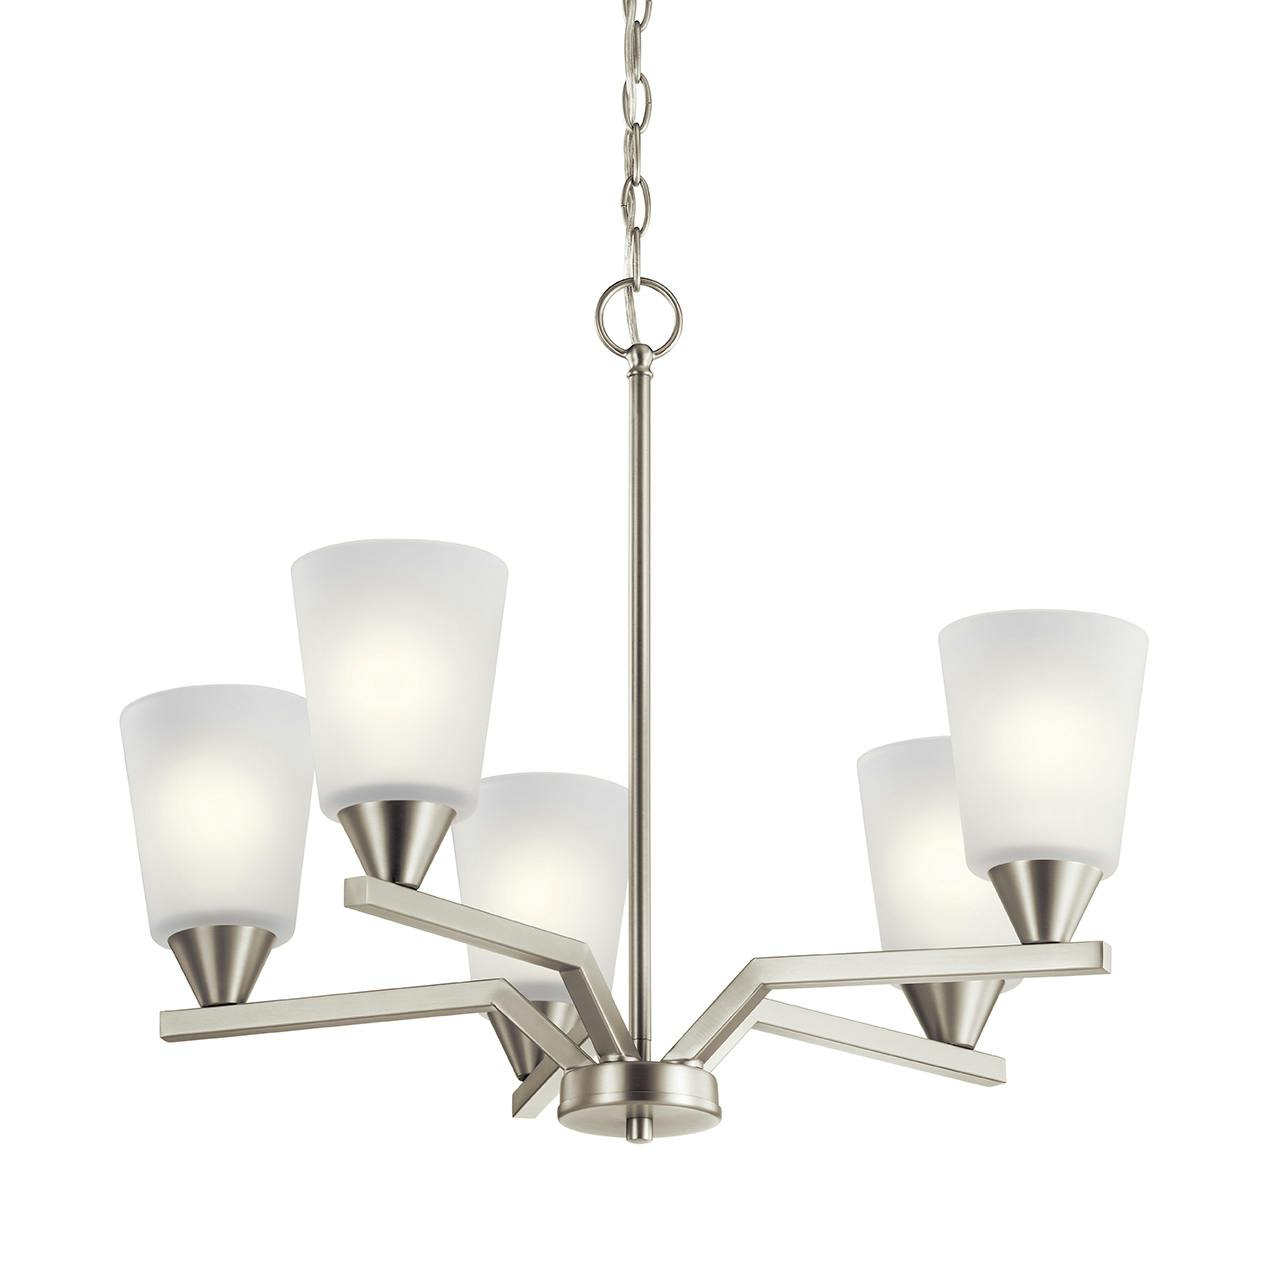 Skagos™ 5 Light Chandelier Brushed Nickel without the canopy on a white background